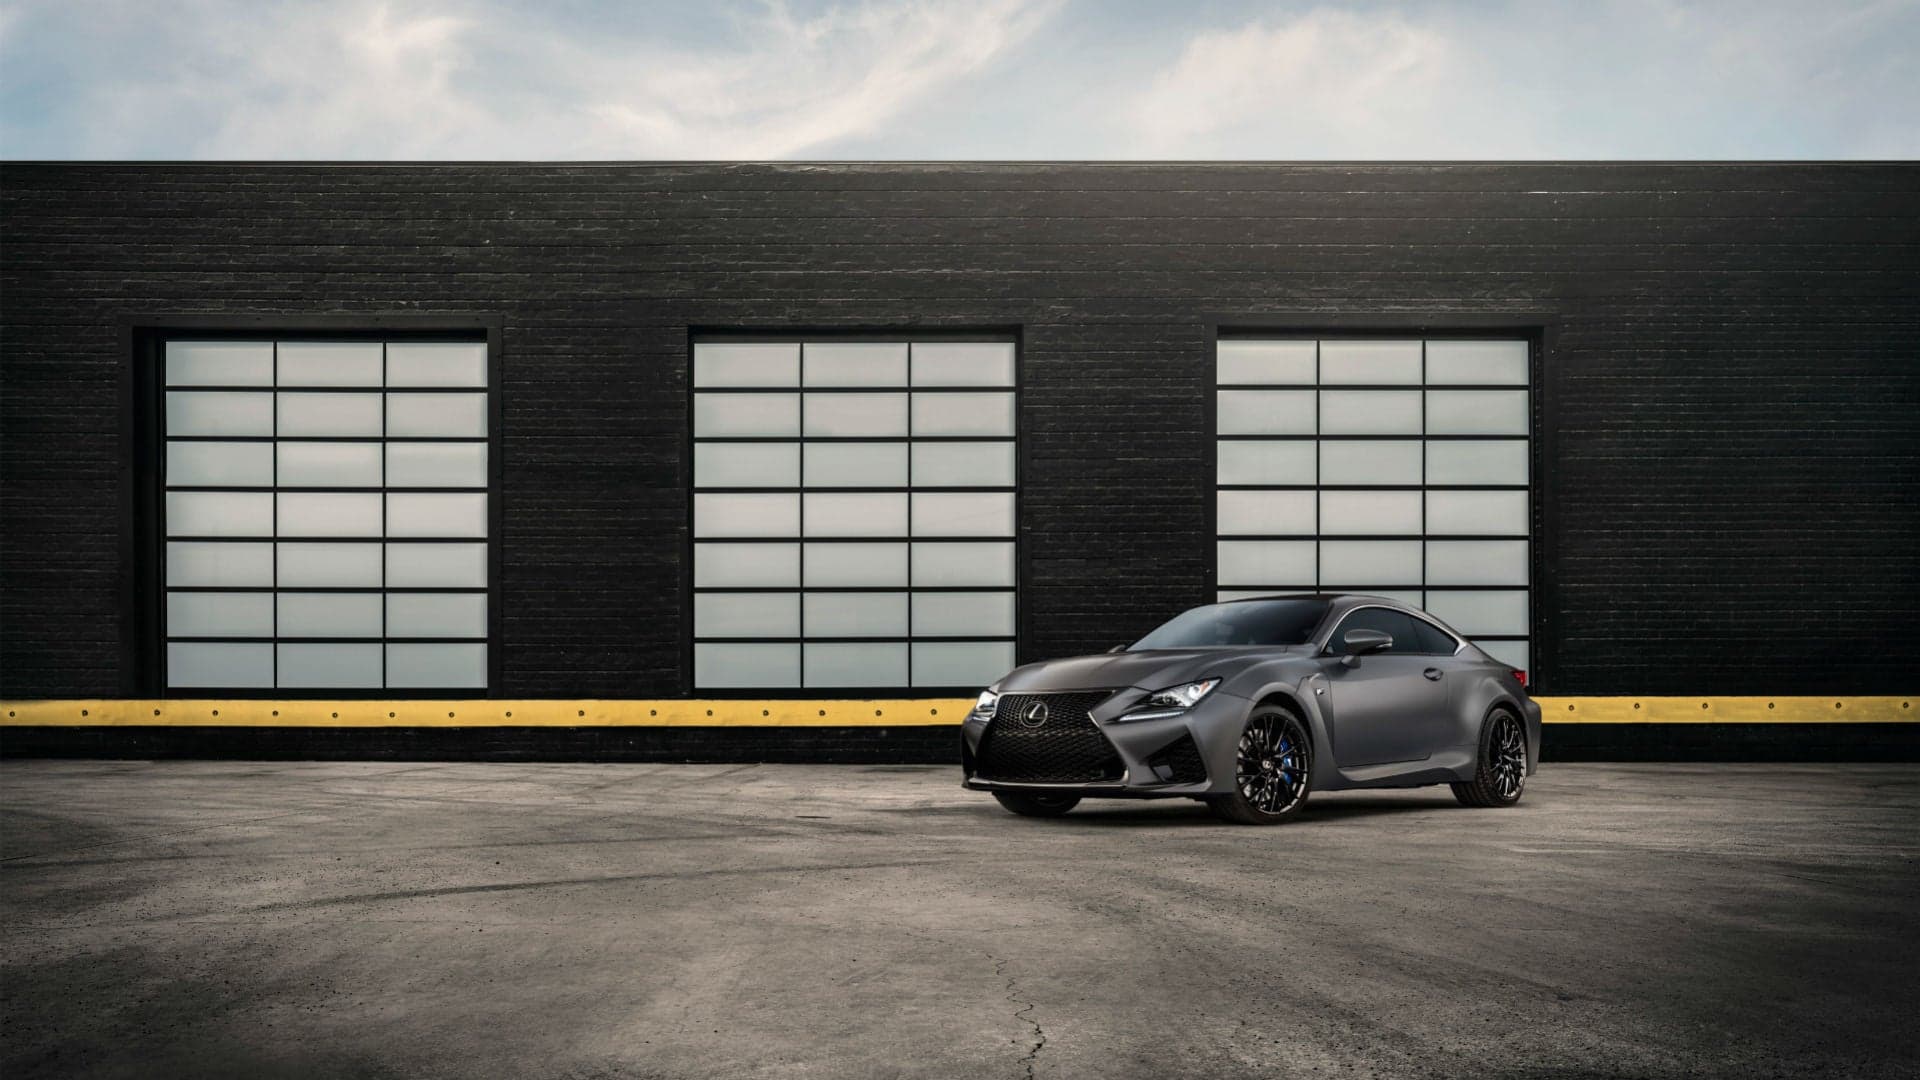 Lexus Will Build Just 350 Examples of the RC F and GS F 10th Anniversary Editions